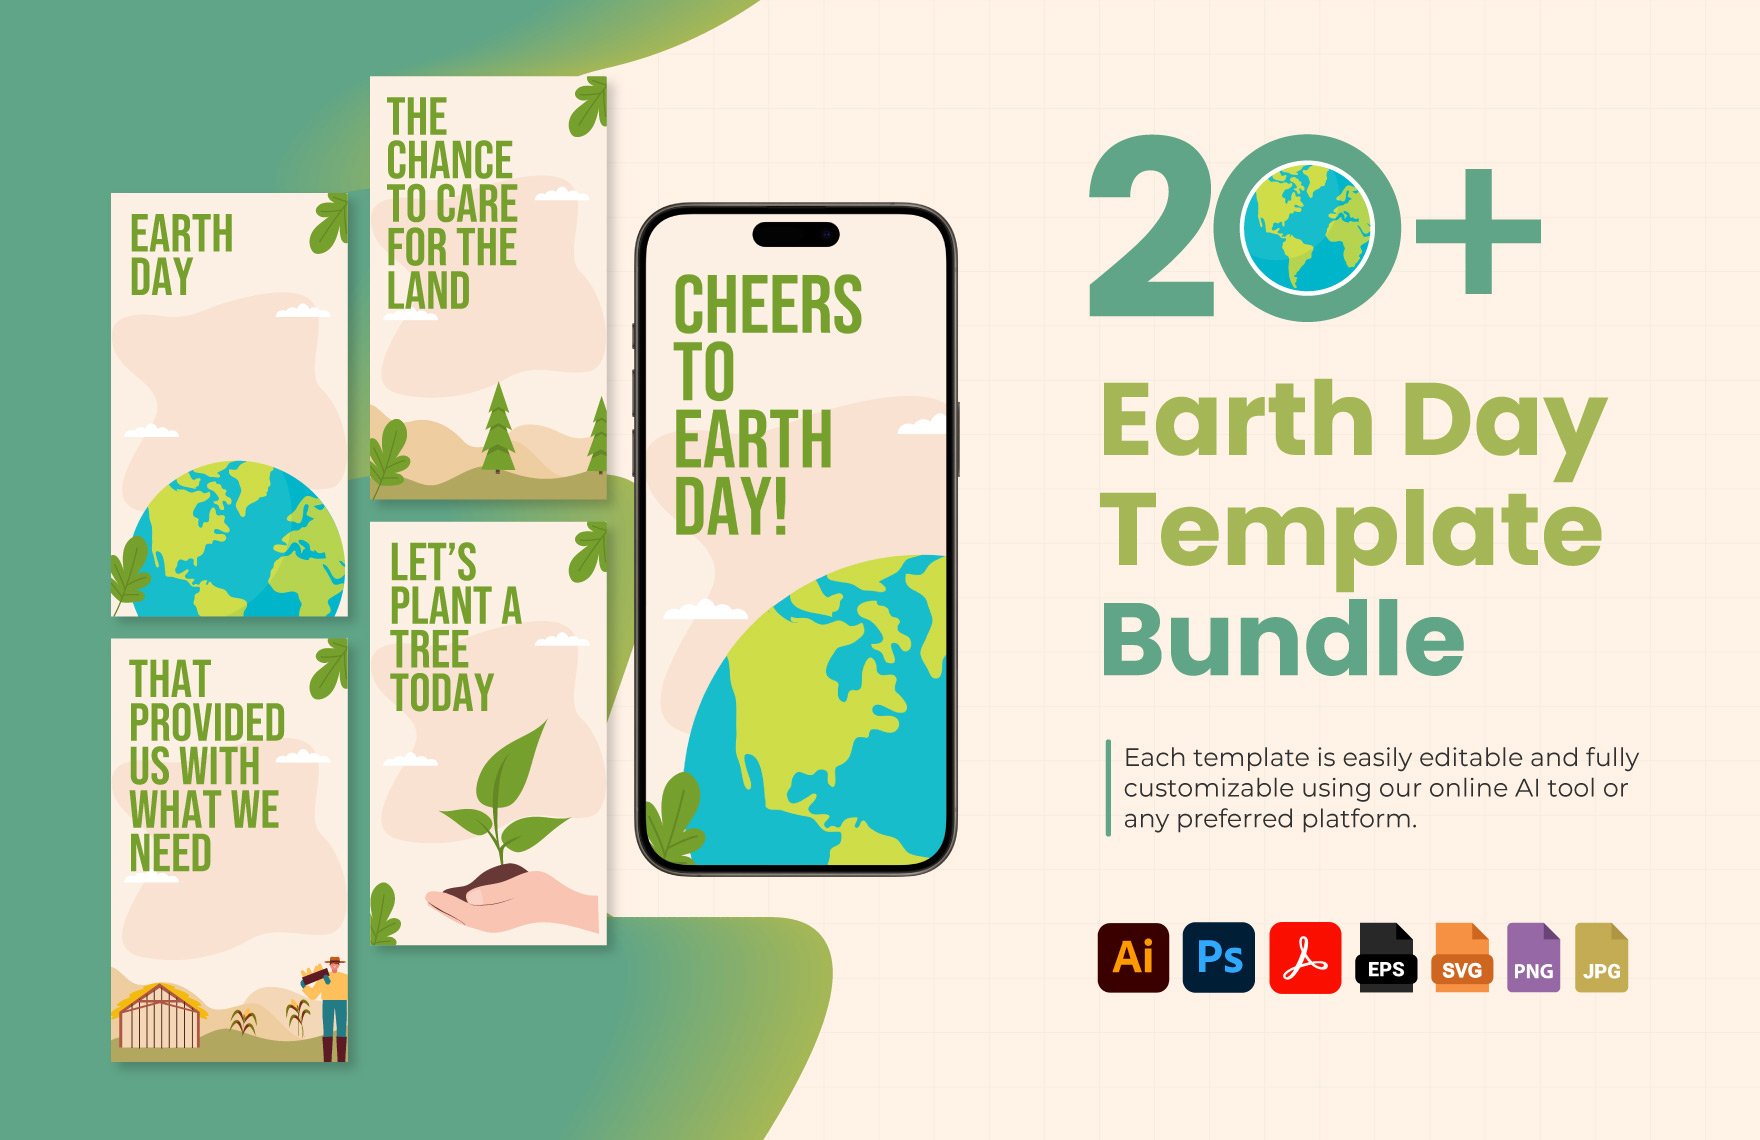 Free 20+ Earth Day Template Bundle in PDF, Illustrator, PSD, EPS, SVG, JPG, PNG